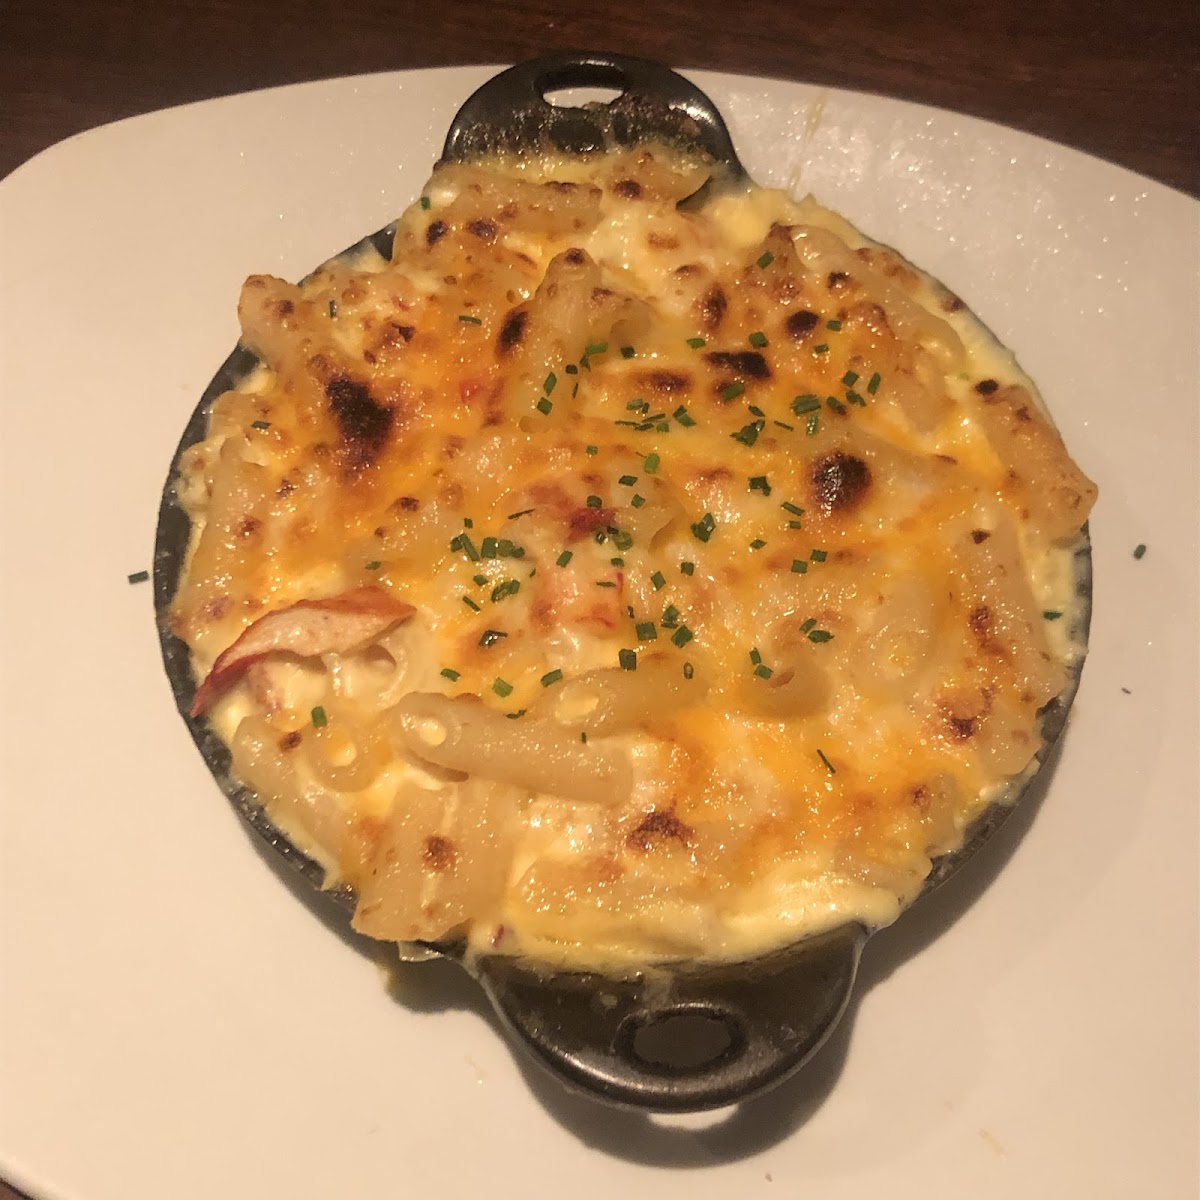 Lobster Mac and cheese.